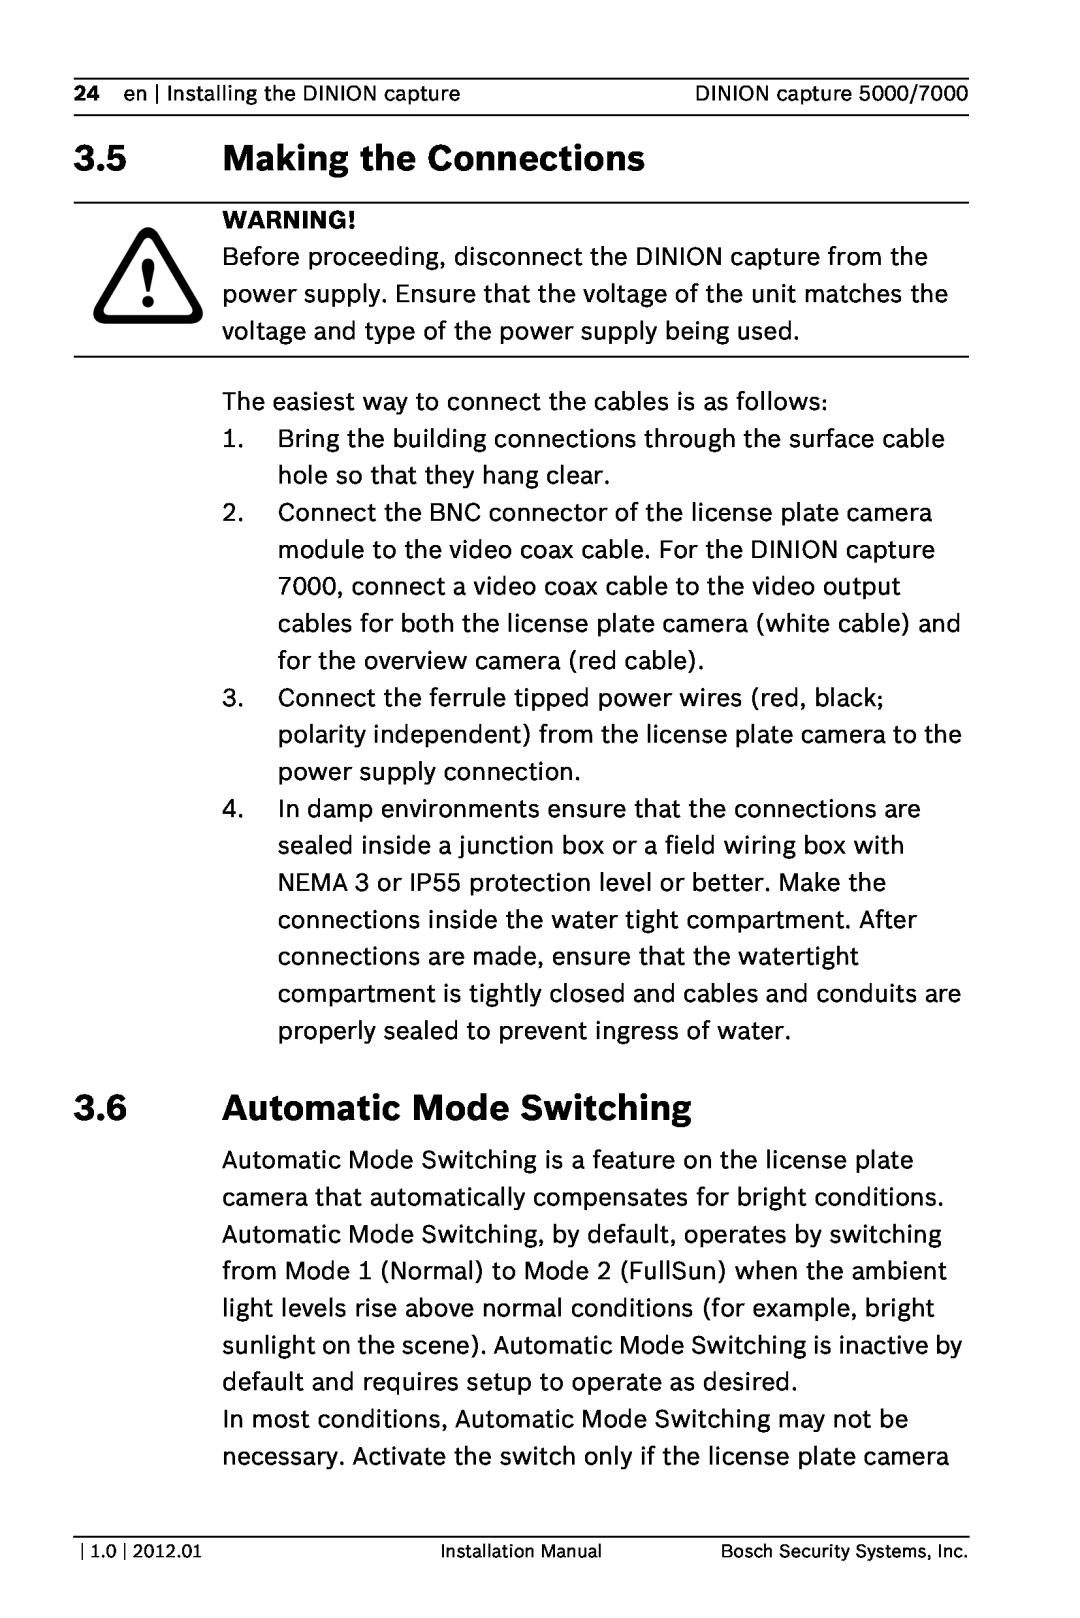 Bosch Appliances 5000, 7000 3.5Making the Connections, 3.6Automatic Mode Switching, 24 en | Installing the DINION capture 